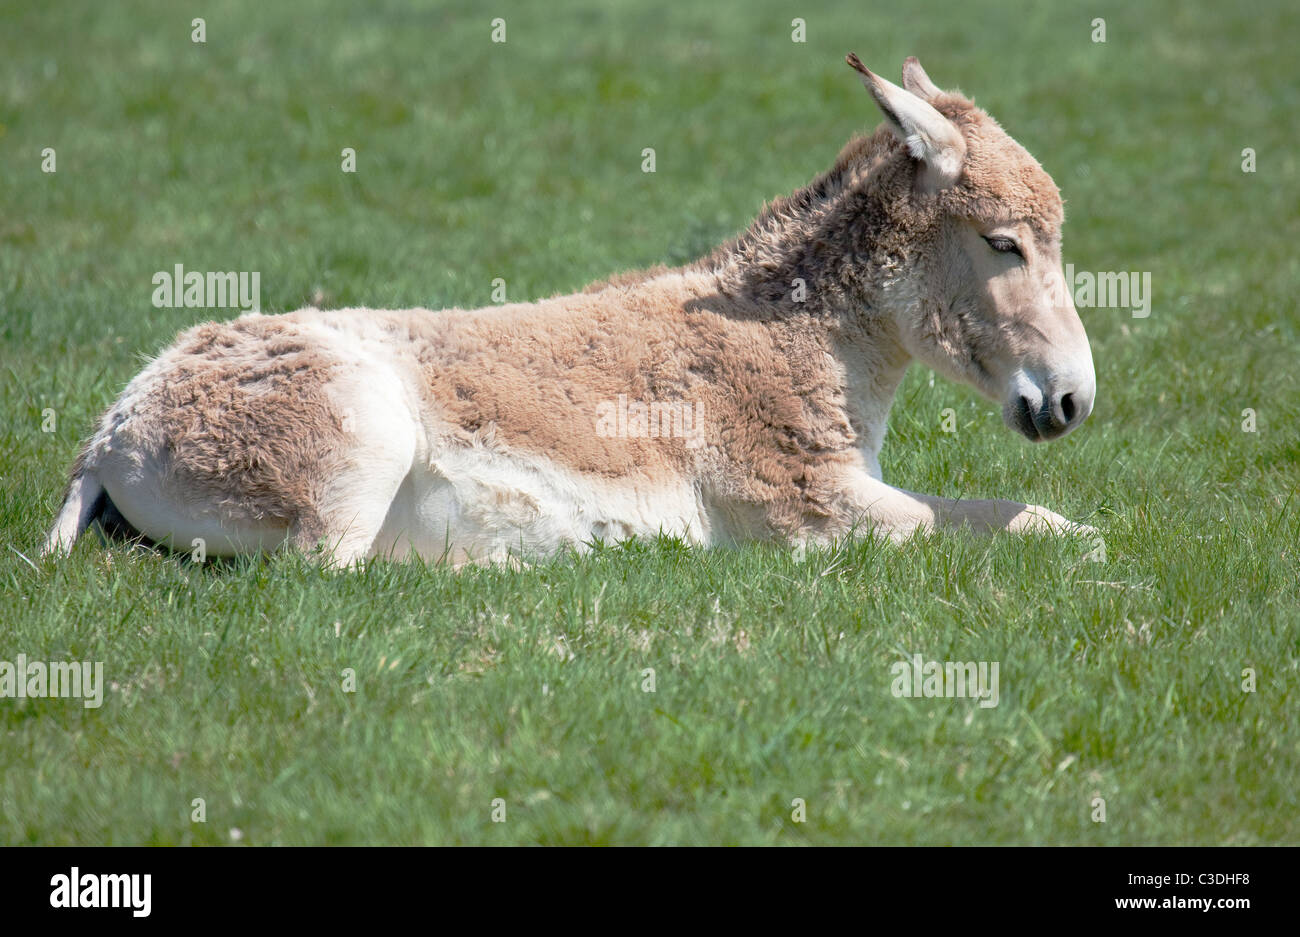 A Young Onager sitting in a field Stock Photo